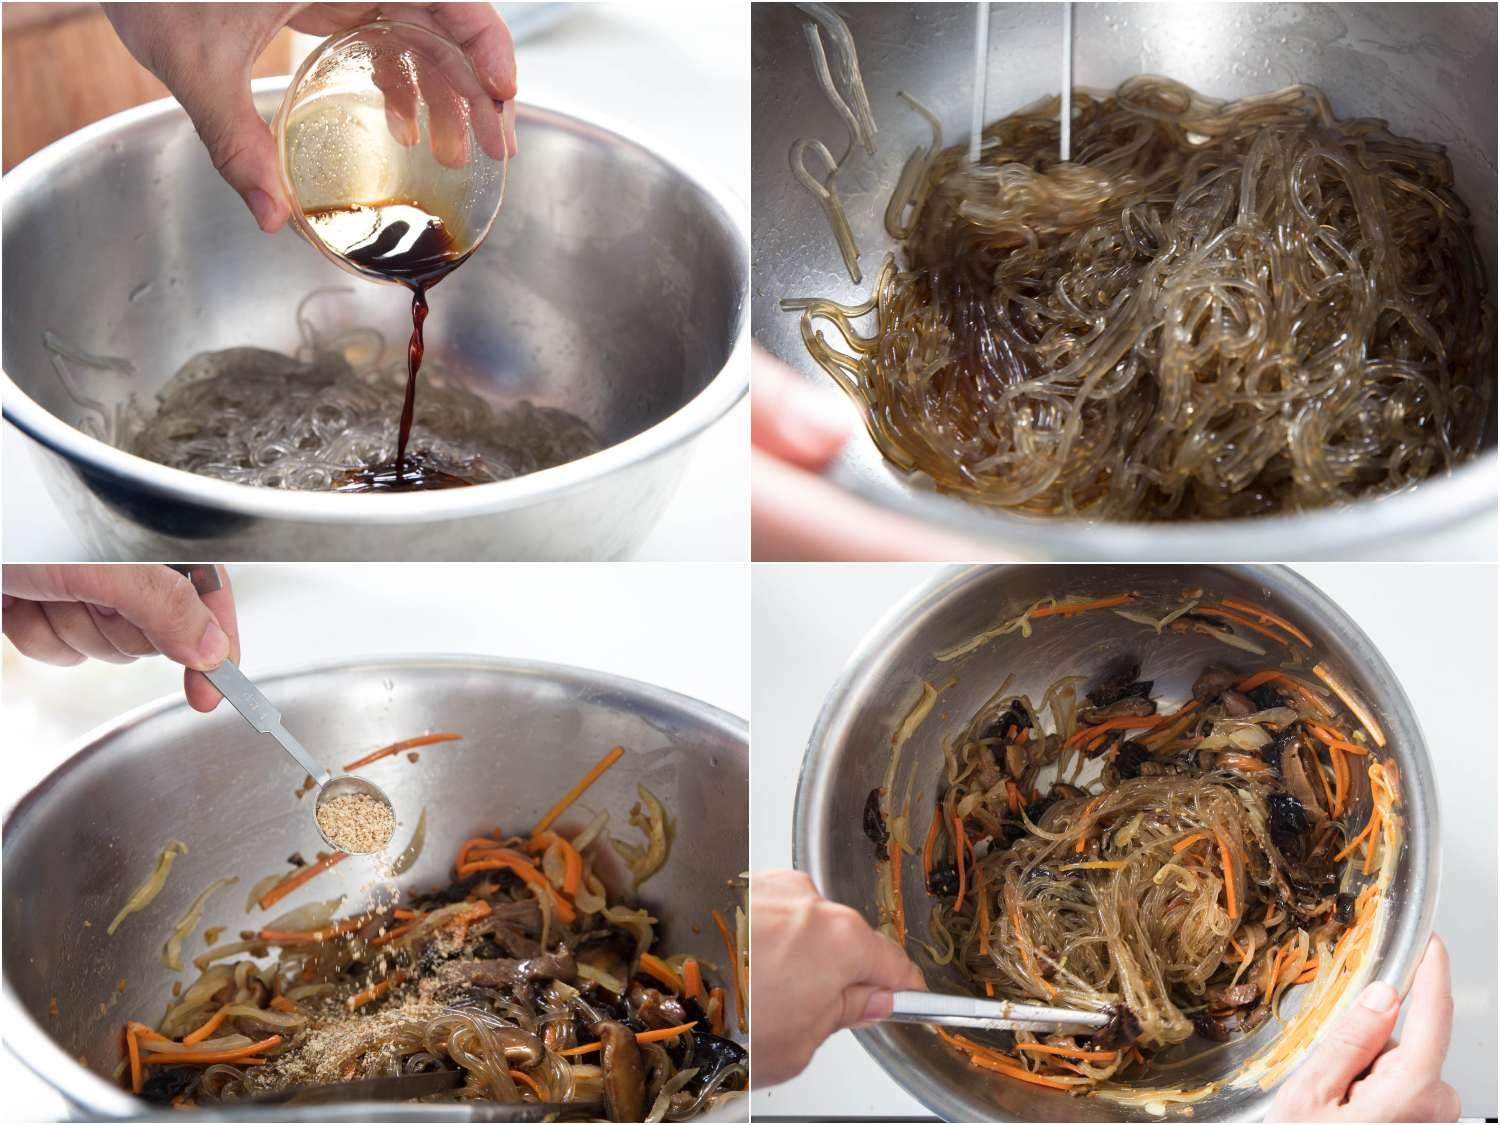 Seasoning the cooked noodles and adding the other ingredients to japchae